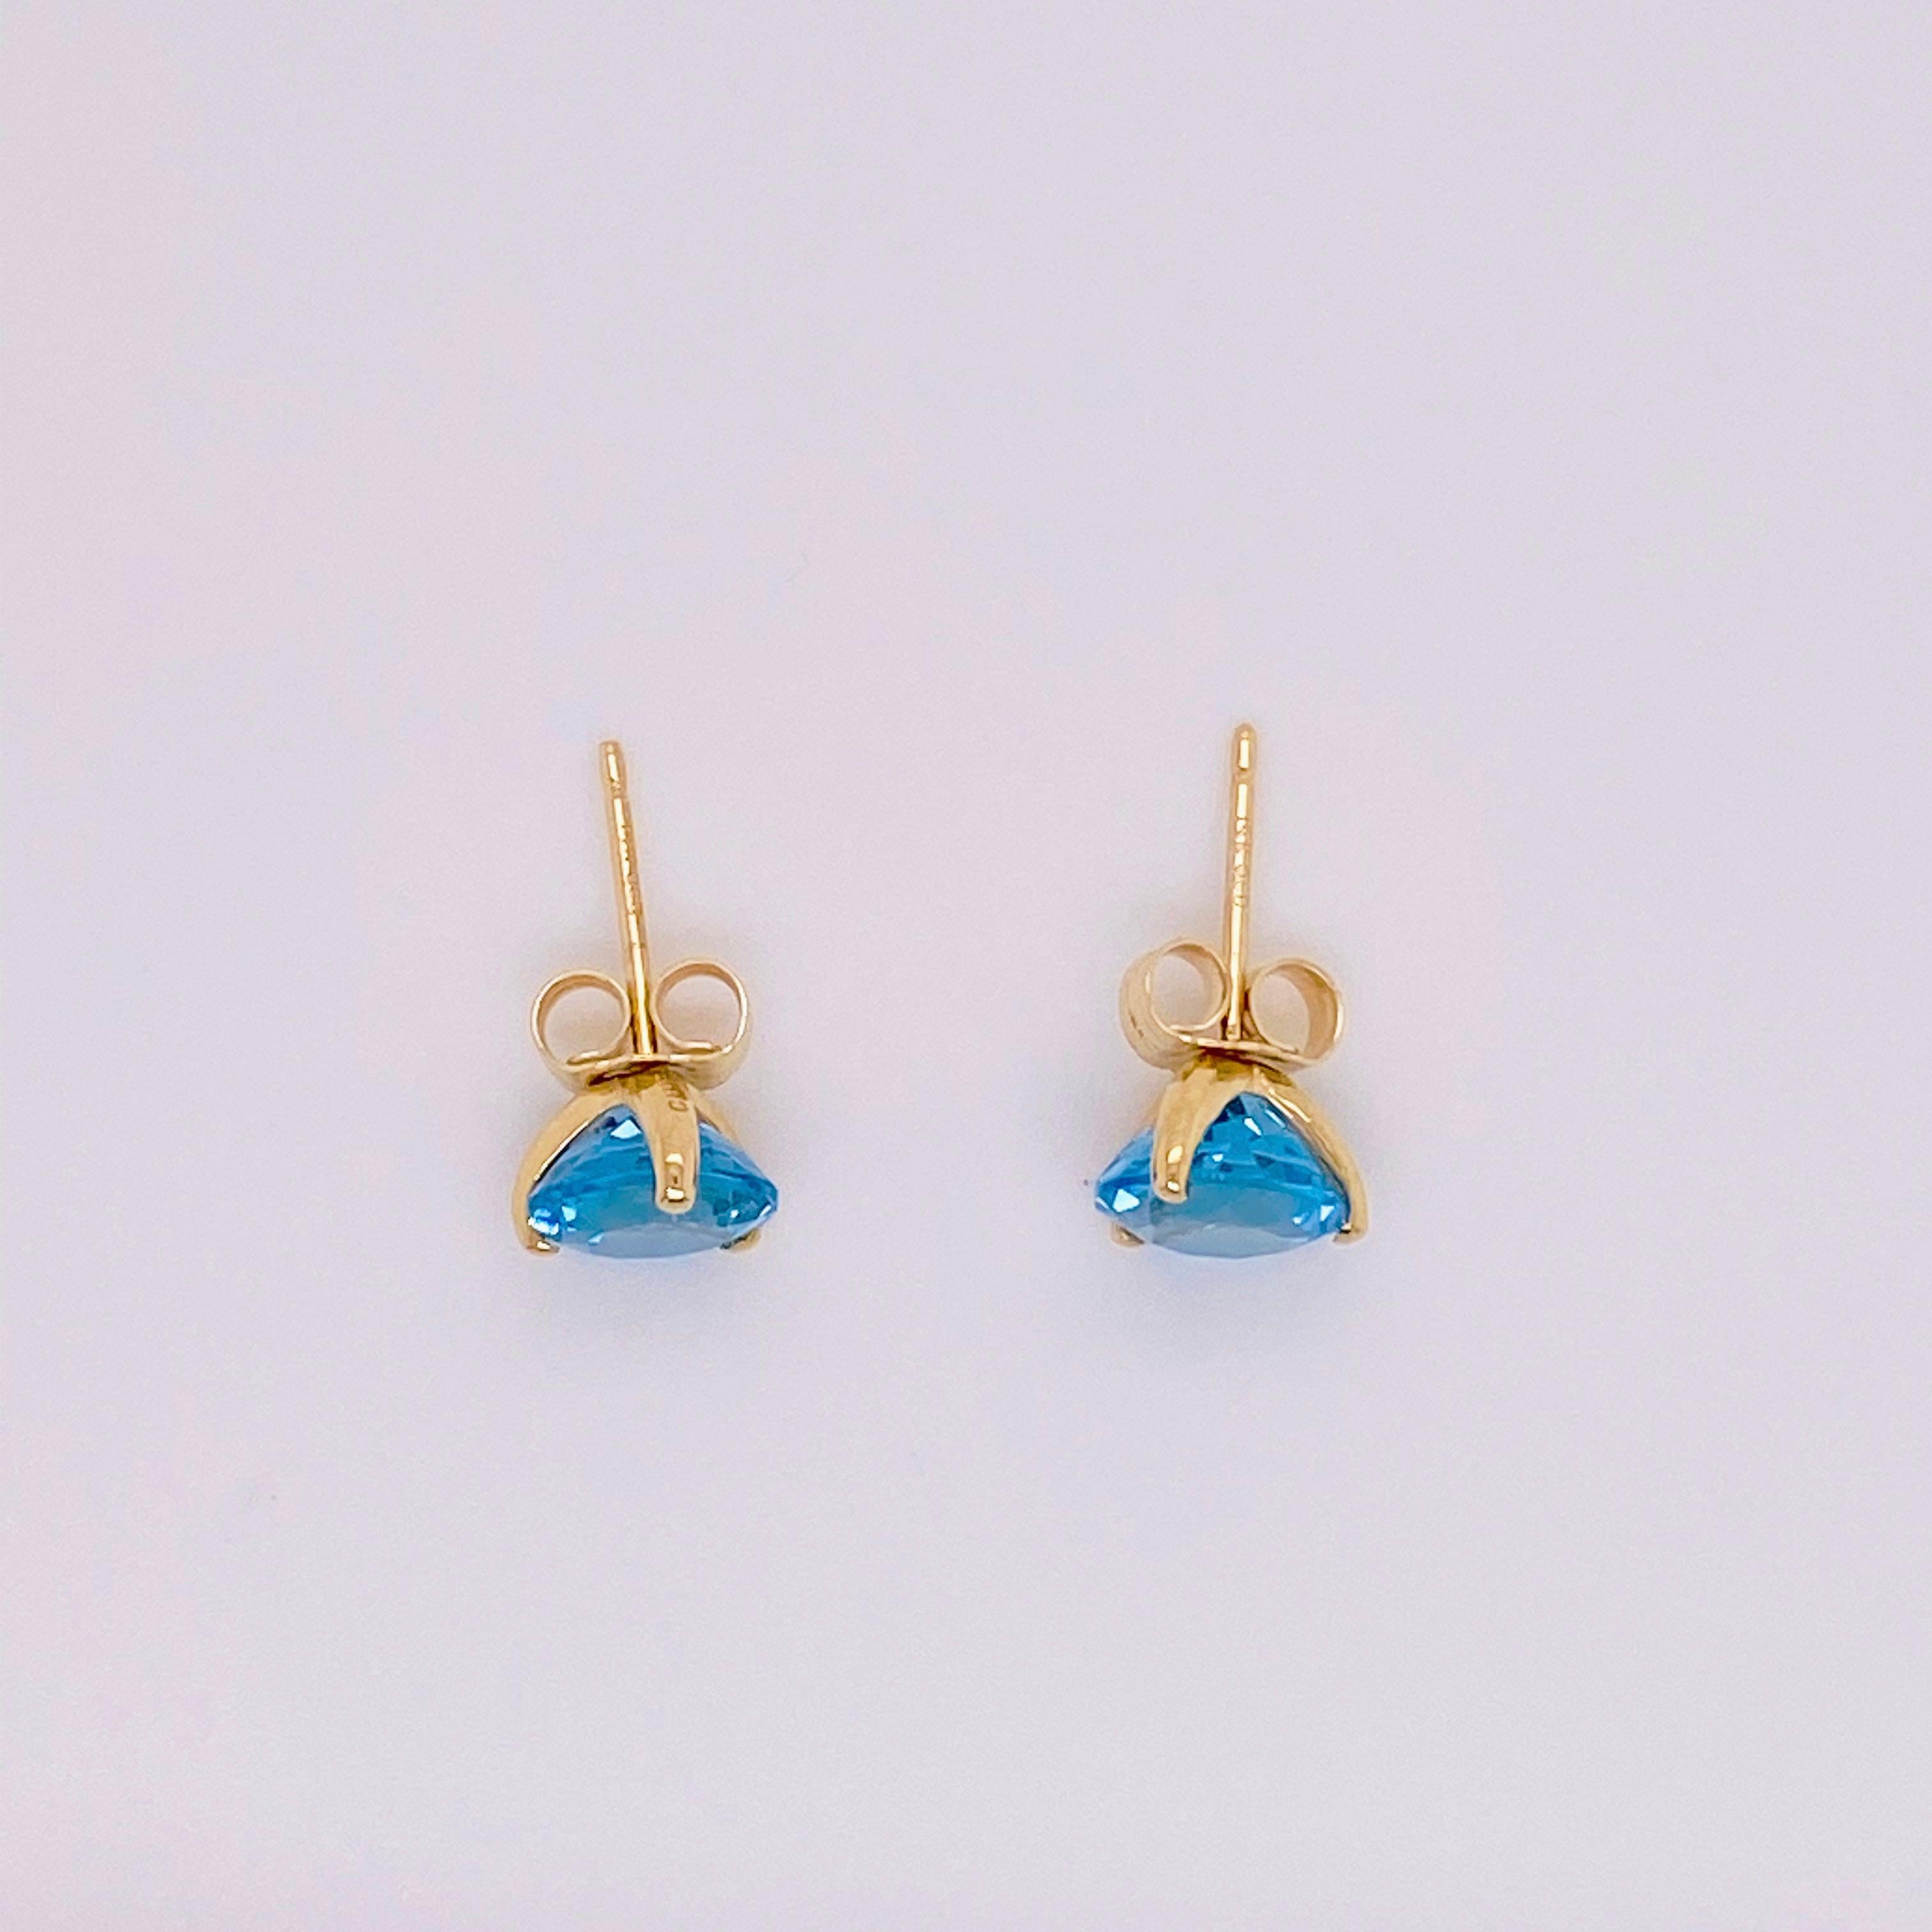 Contemporary Blue Topaz Earrings, Yellow Gold, 14k, Martini Stud, 14kt, Stud Earrings, 2.90CT For Sale